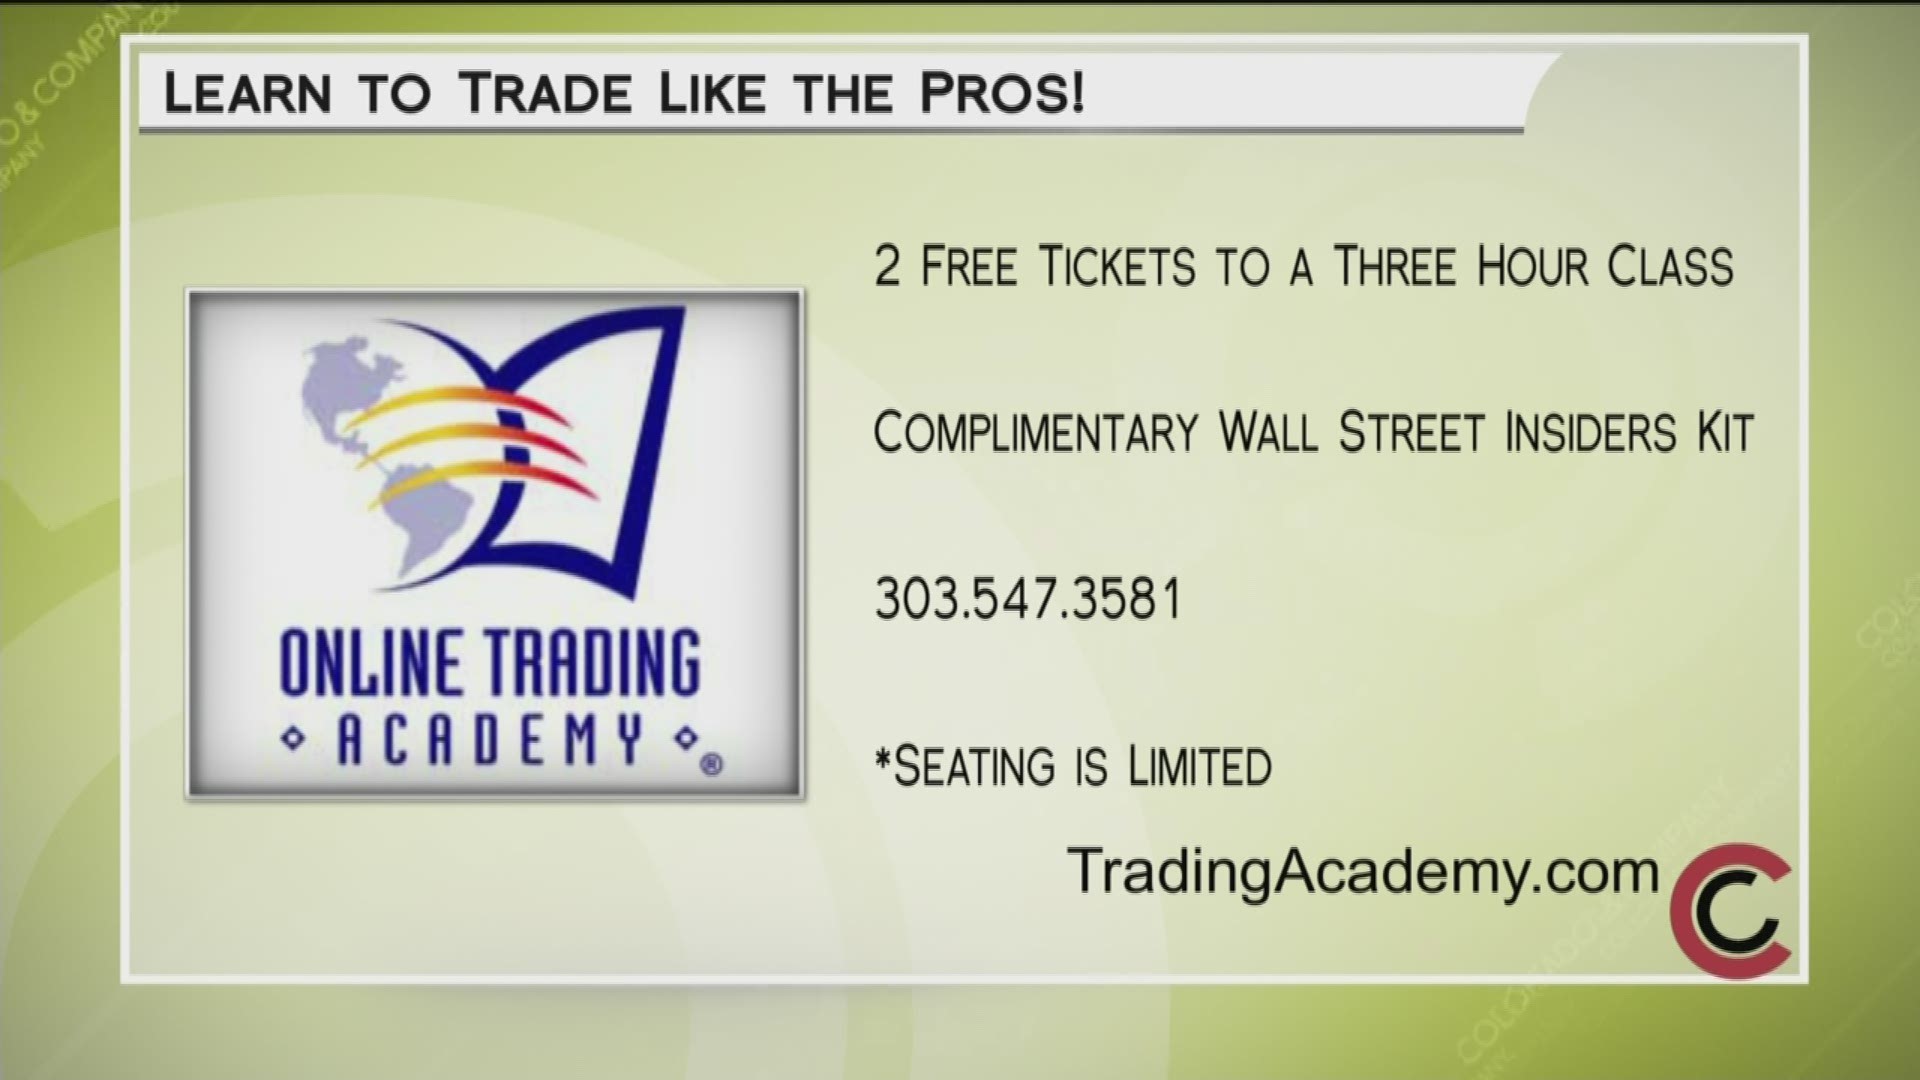 Trade and invest like the pros. Call 303.547.3581 or visit TradingAcademy.com to sign up and claim your two free tickets for a half-day class.